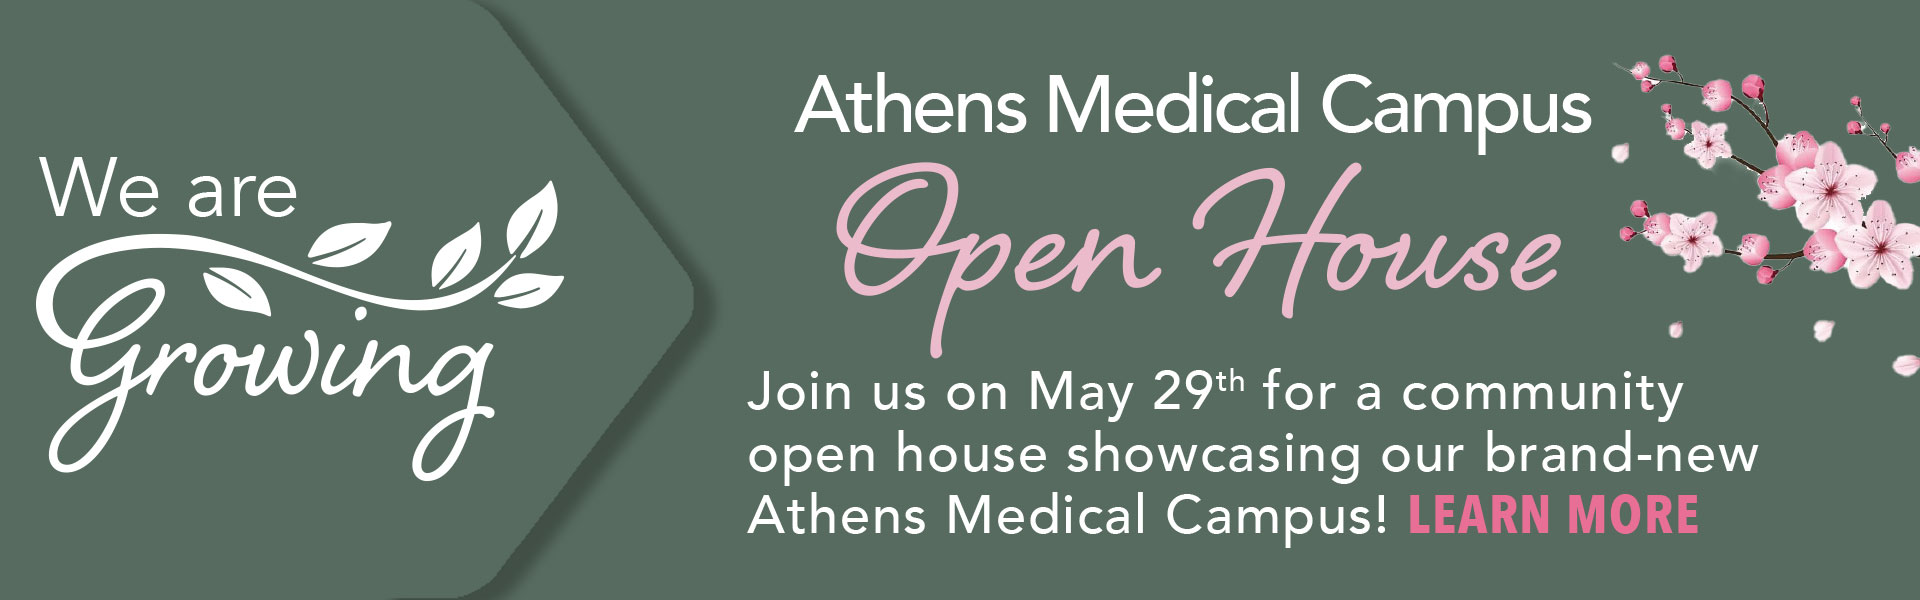 06360.01-Athens_OpenHouse_Banner_vf